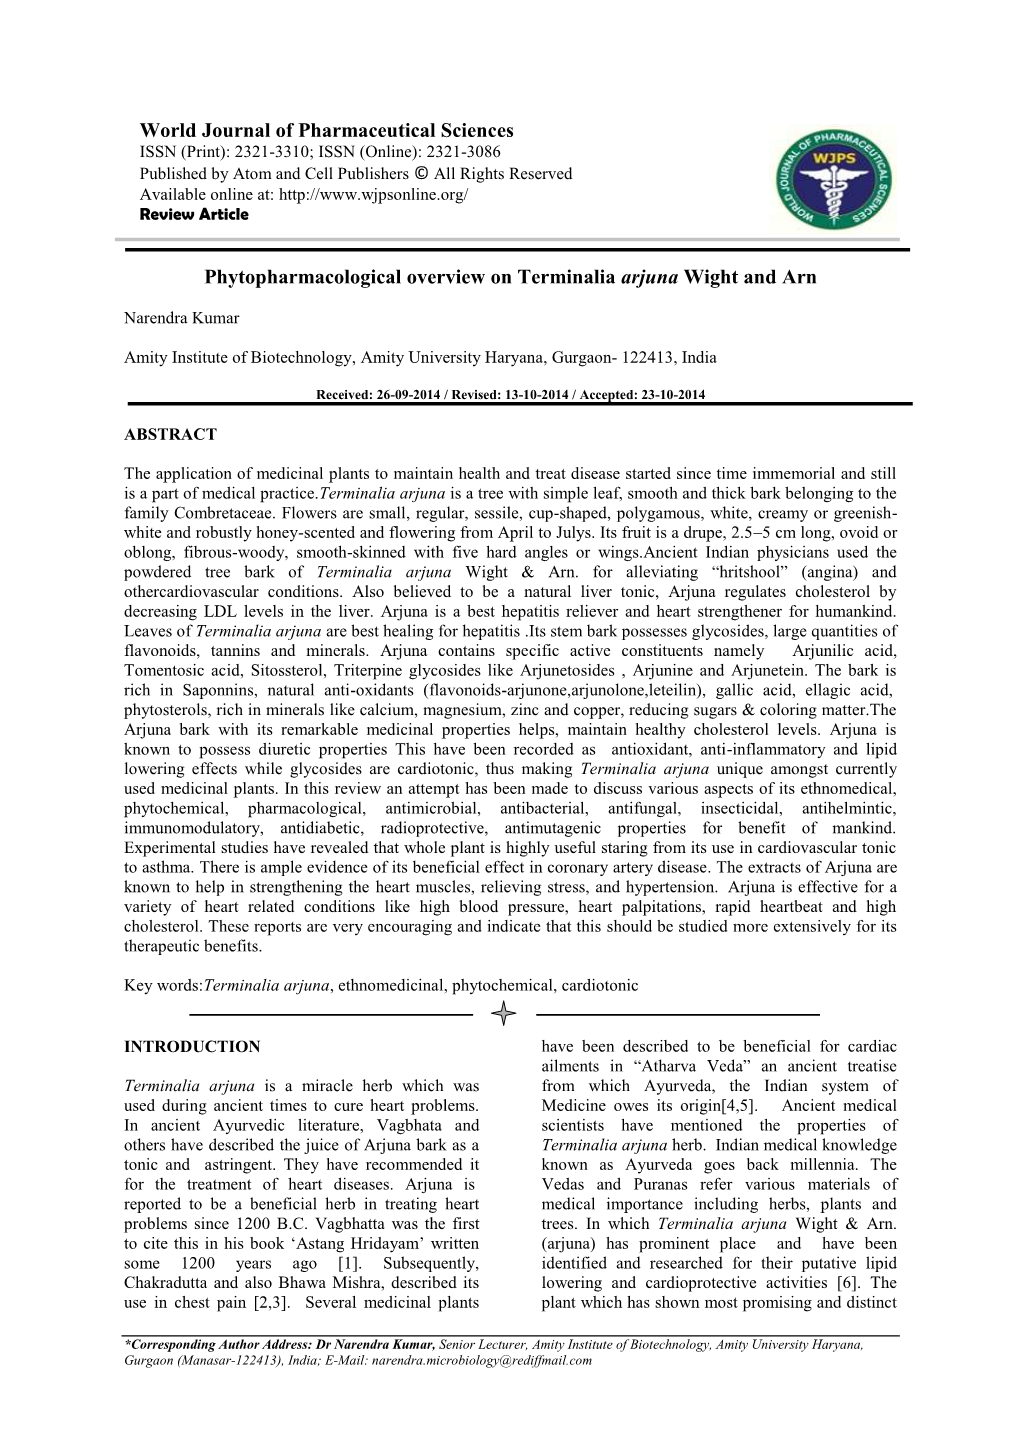 World Journal of Pharmaceutical Sciences Phytopharmacological Overview on Terminalia Arjuna Wight And